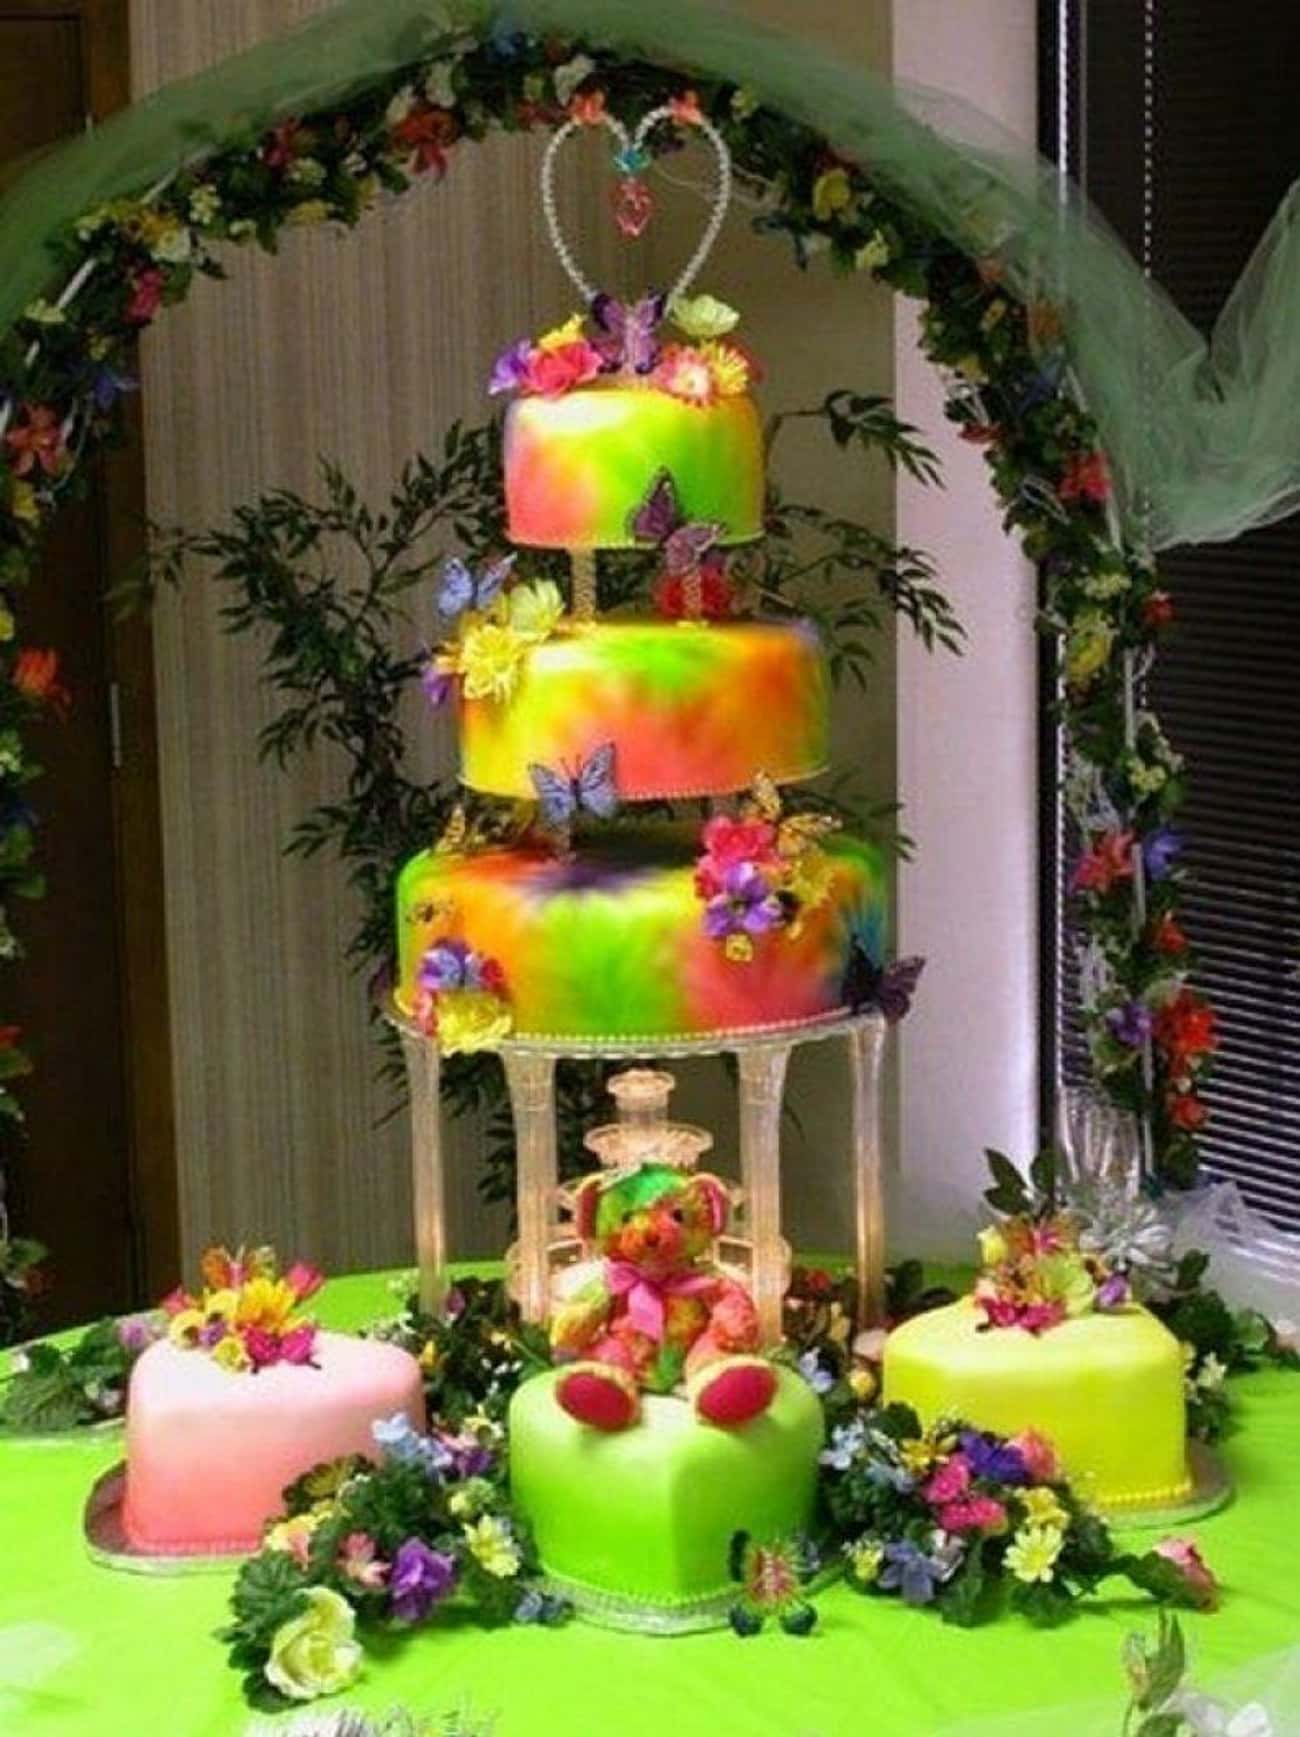 If Lisa Frank got married, this would probably be her wedding cake - colorful and whimsical.